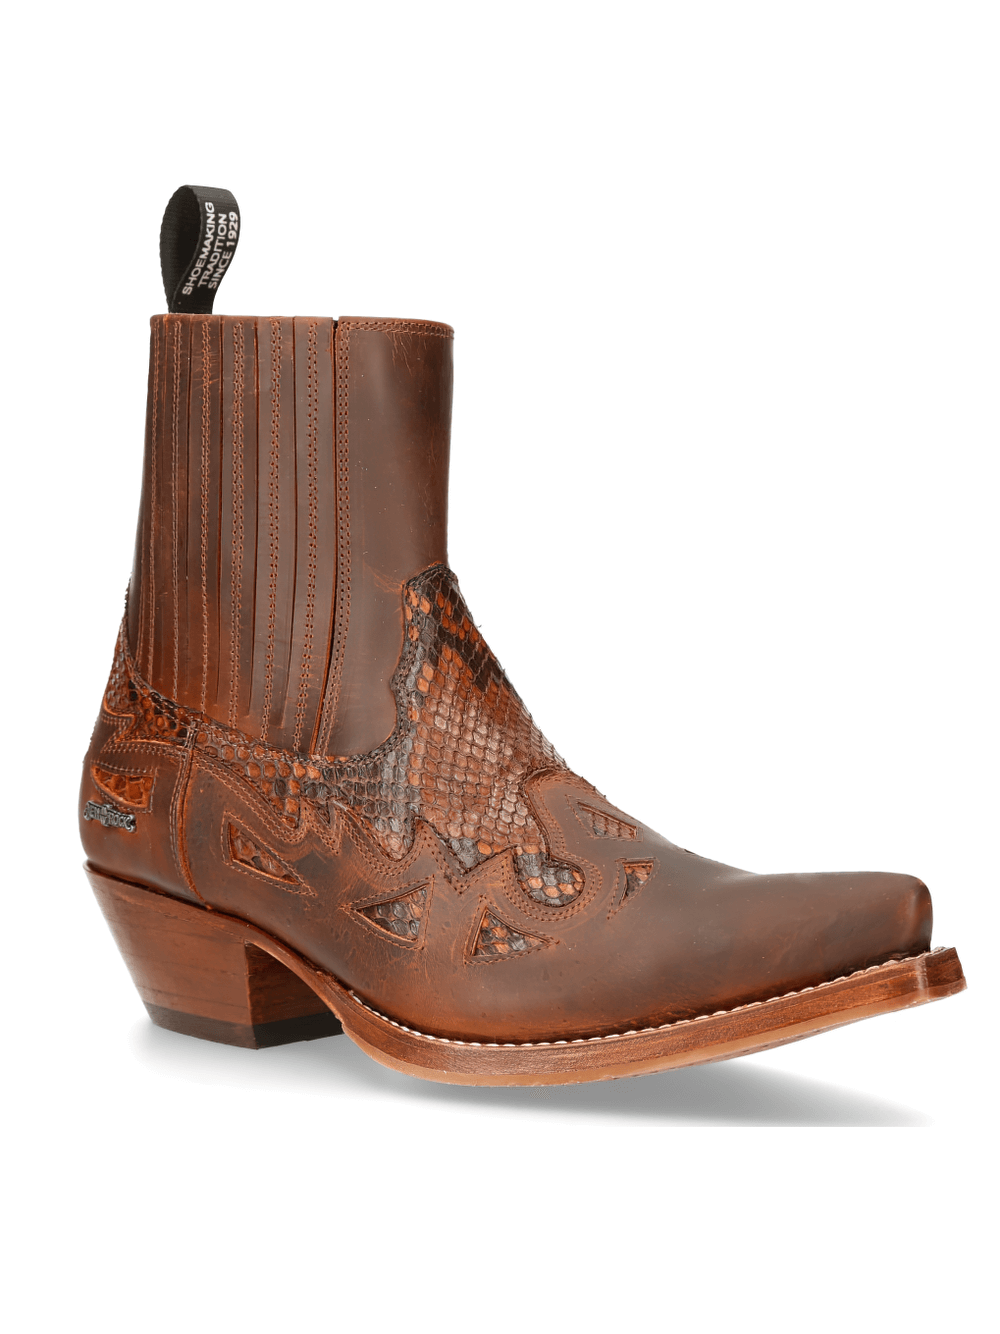 NEW ROCK Zippered Brown Leather Ankle Boots with Detail